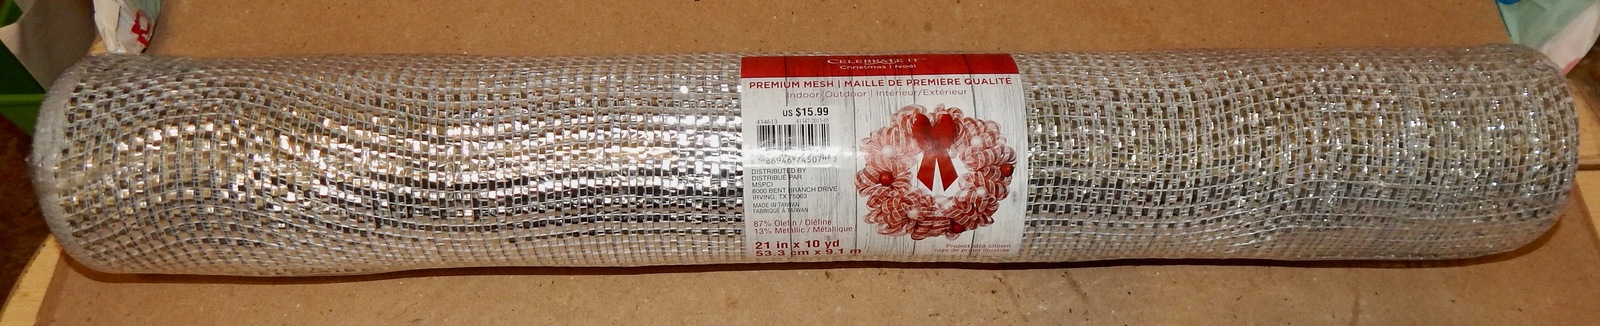 Primary image for Mesh Rolls Crafts Wreaths Many Colors You Choose Celebrate It 21" Wide 178V-2